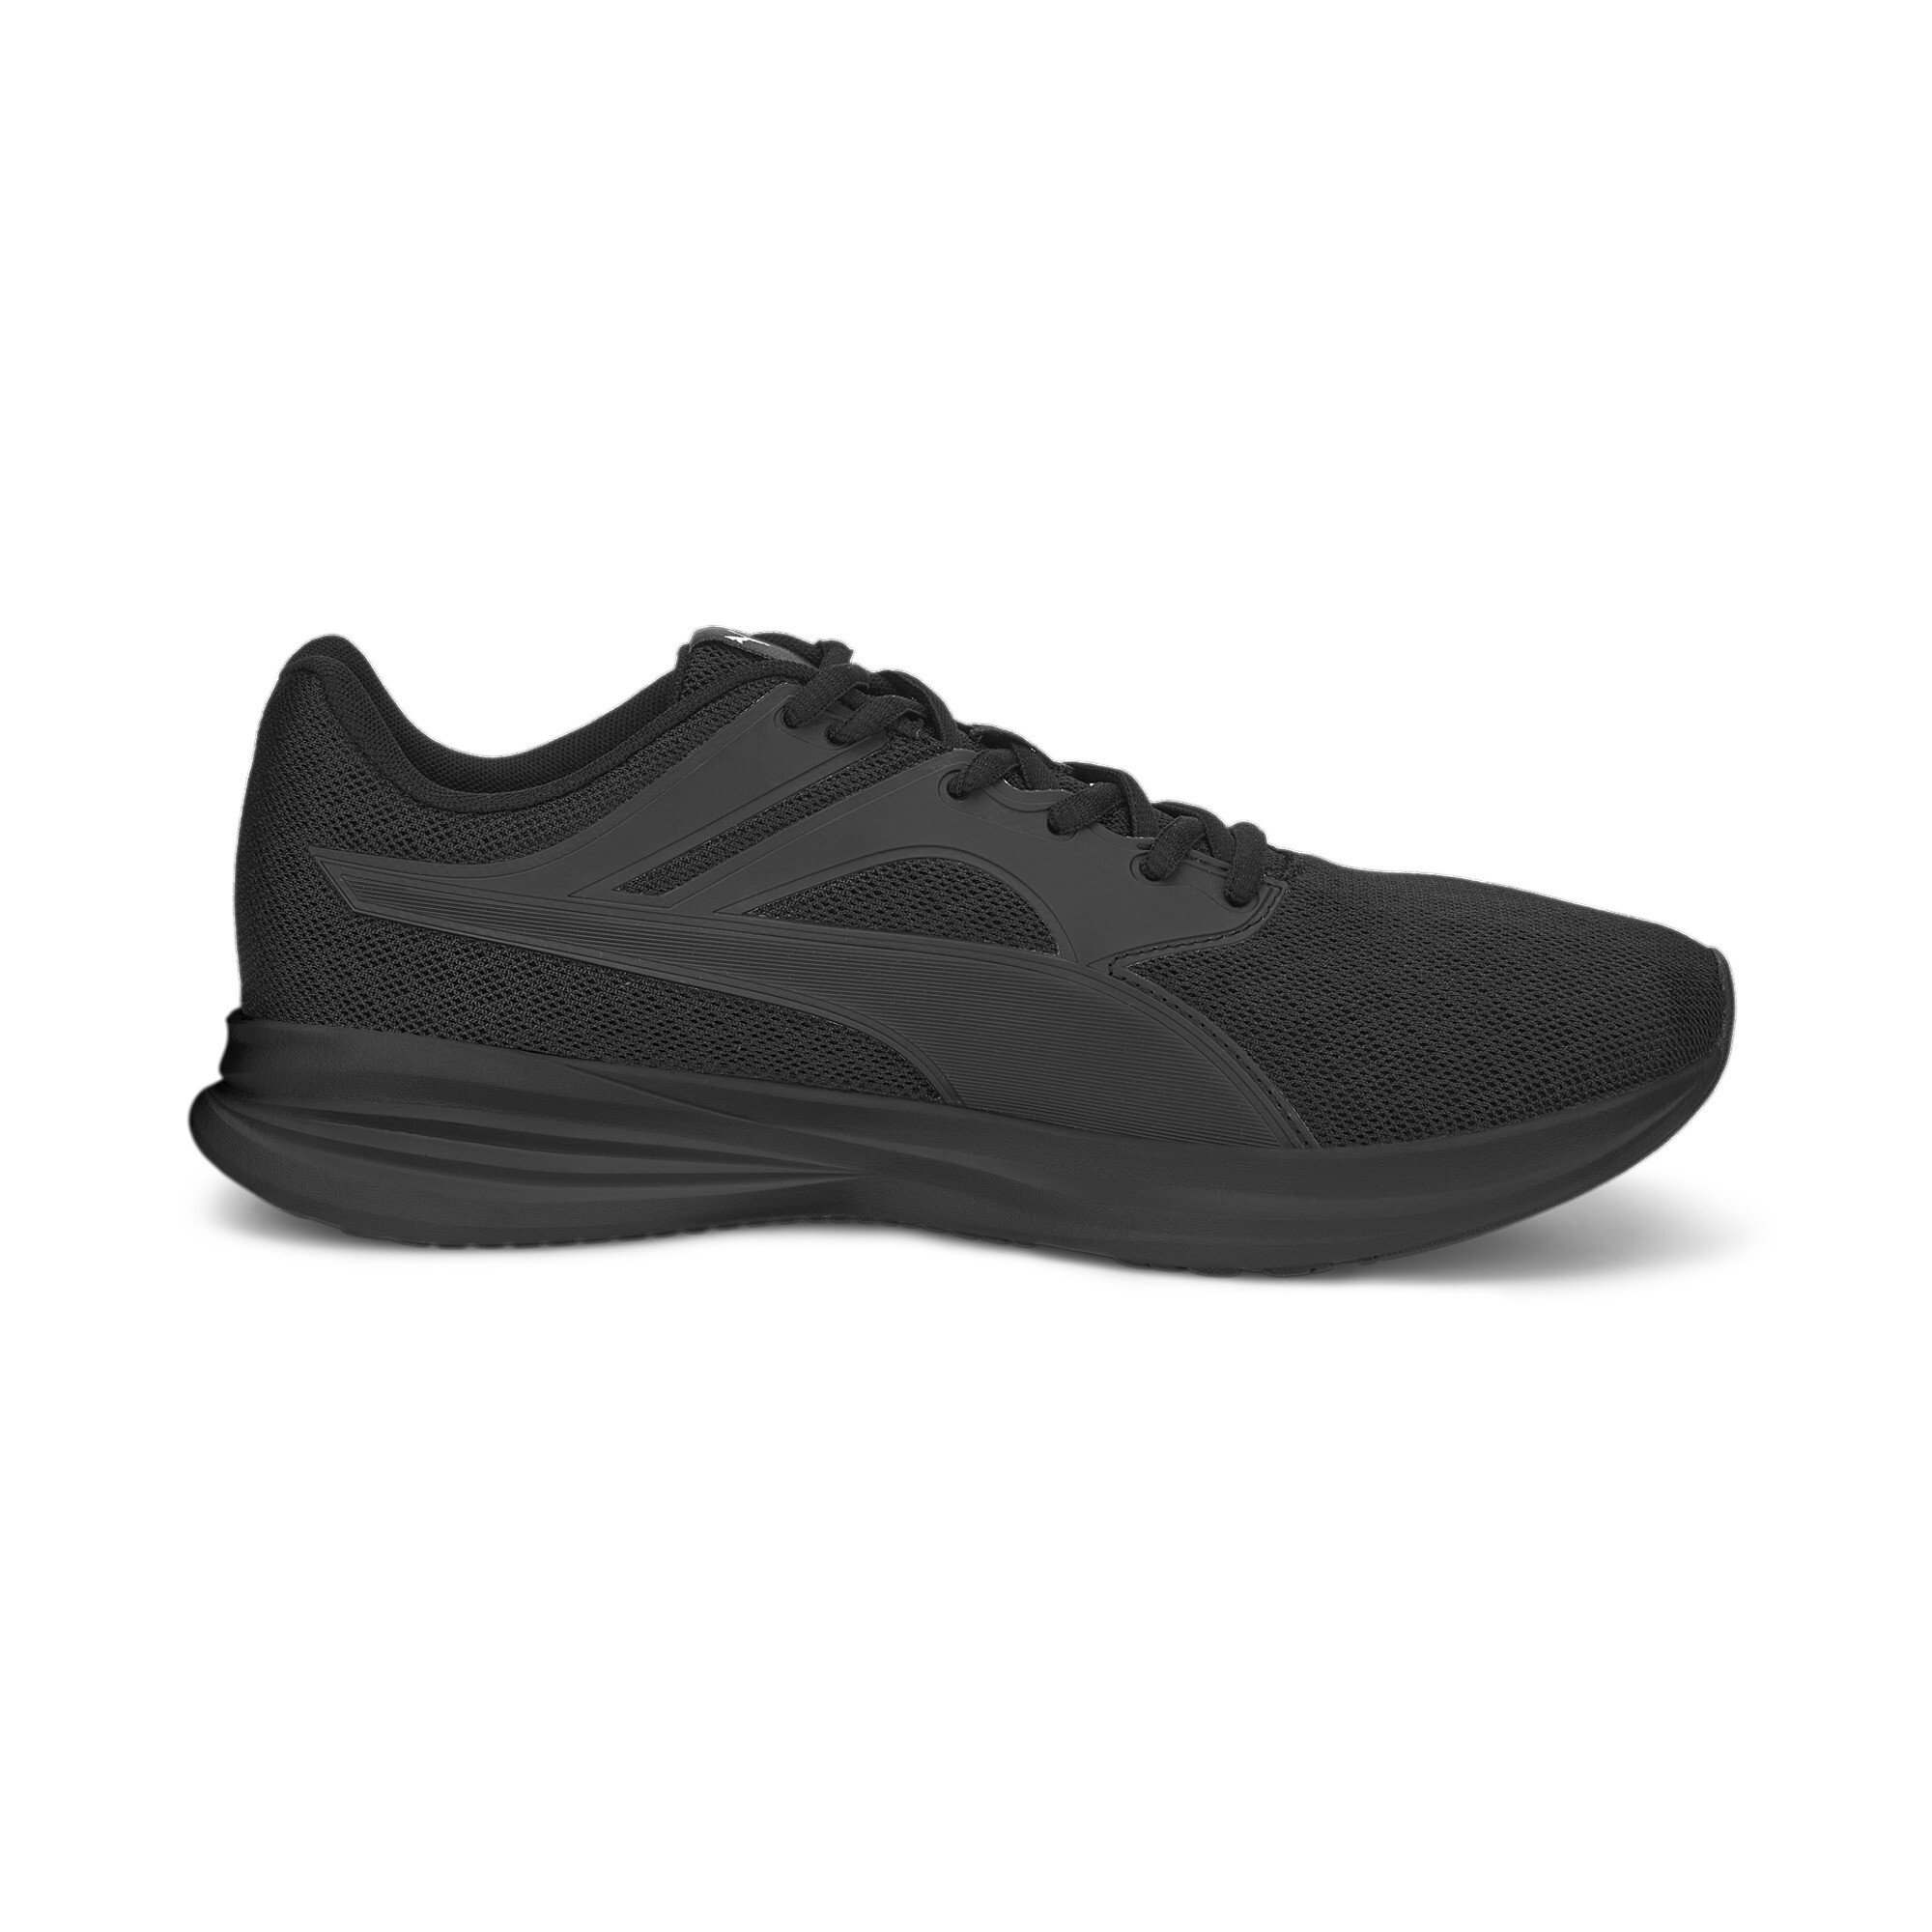 Puma Transport Running Shoes, Black, Size 38, Shoes